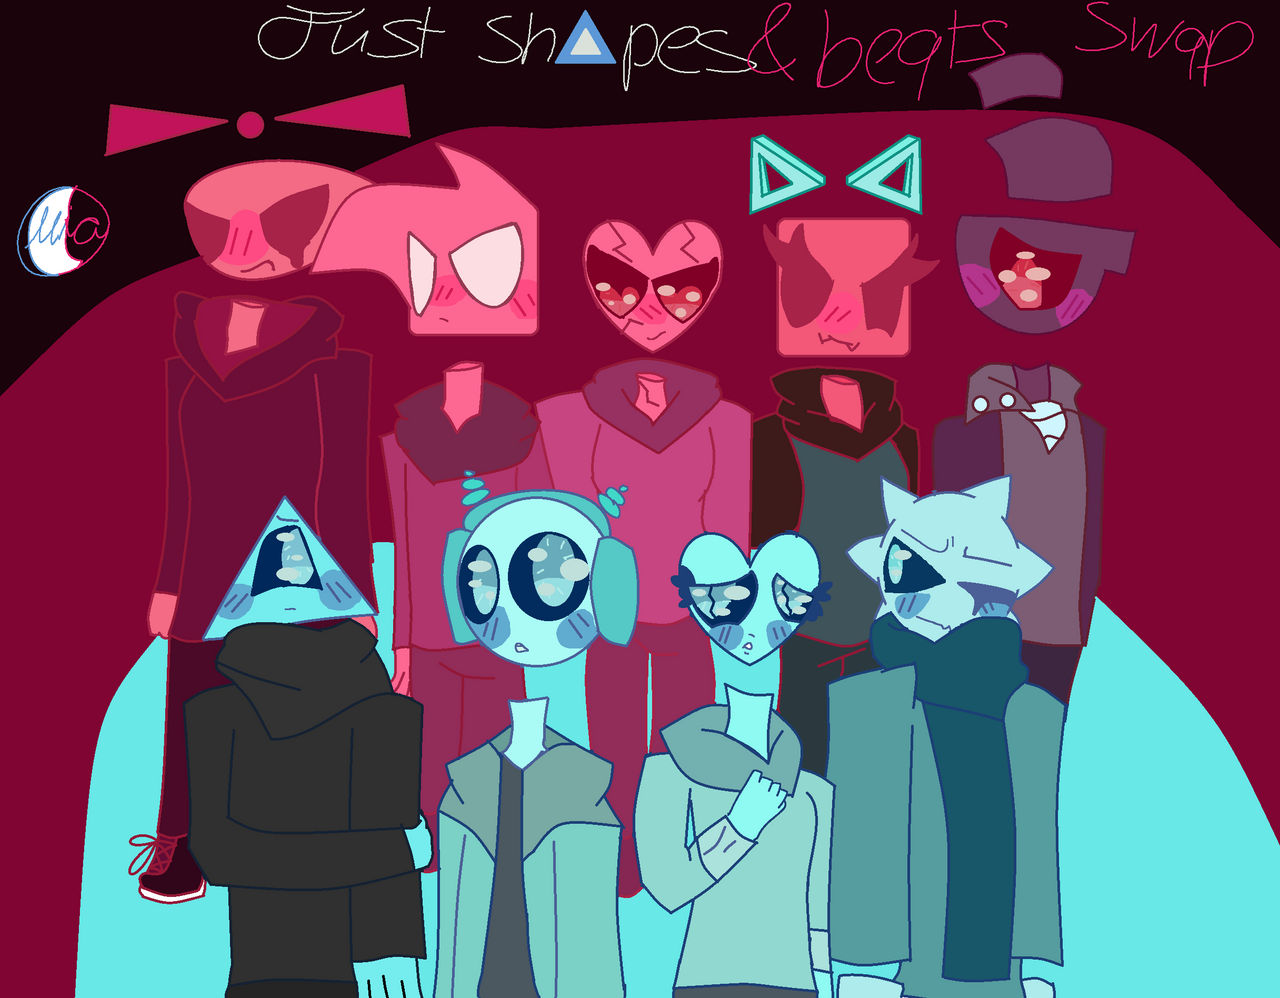 Shapes Just Shapes And Beats by nIKfD on DeviantArt